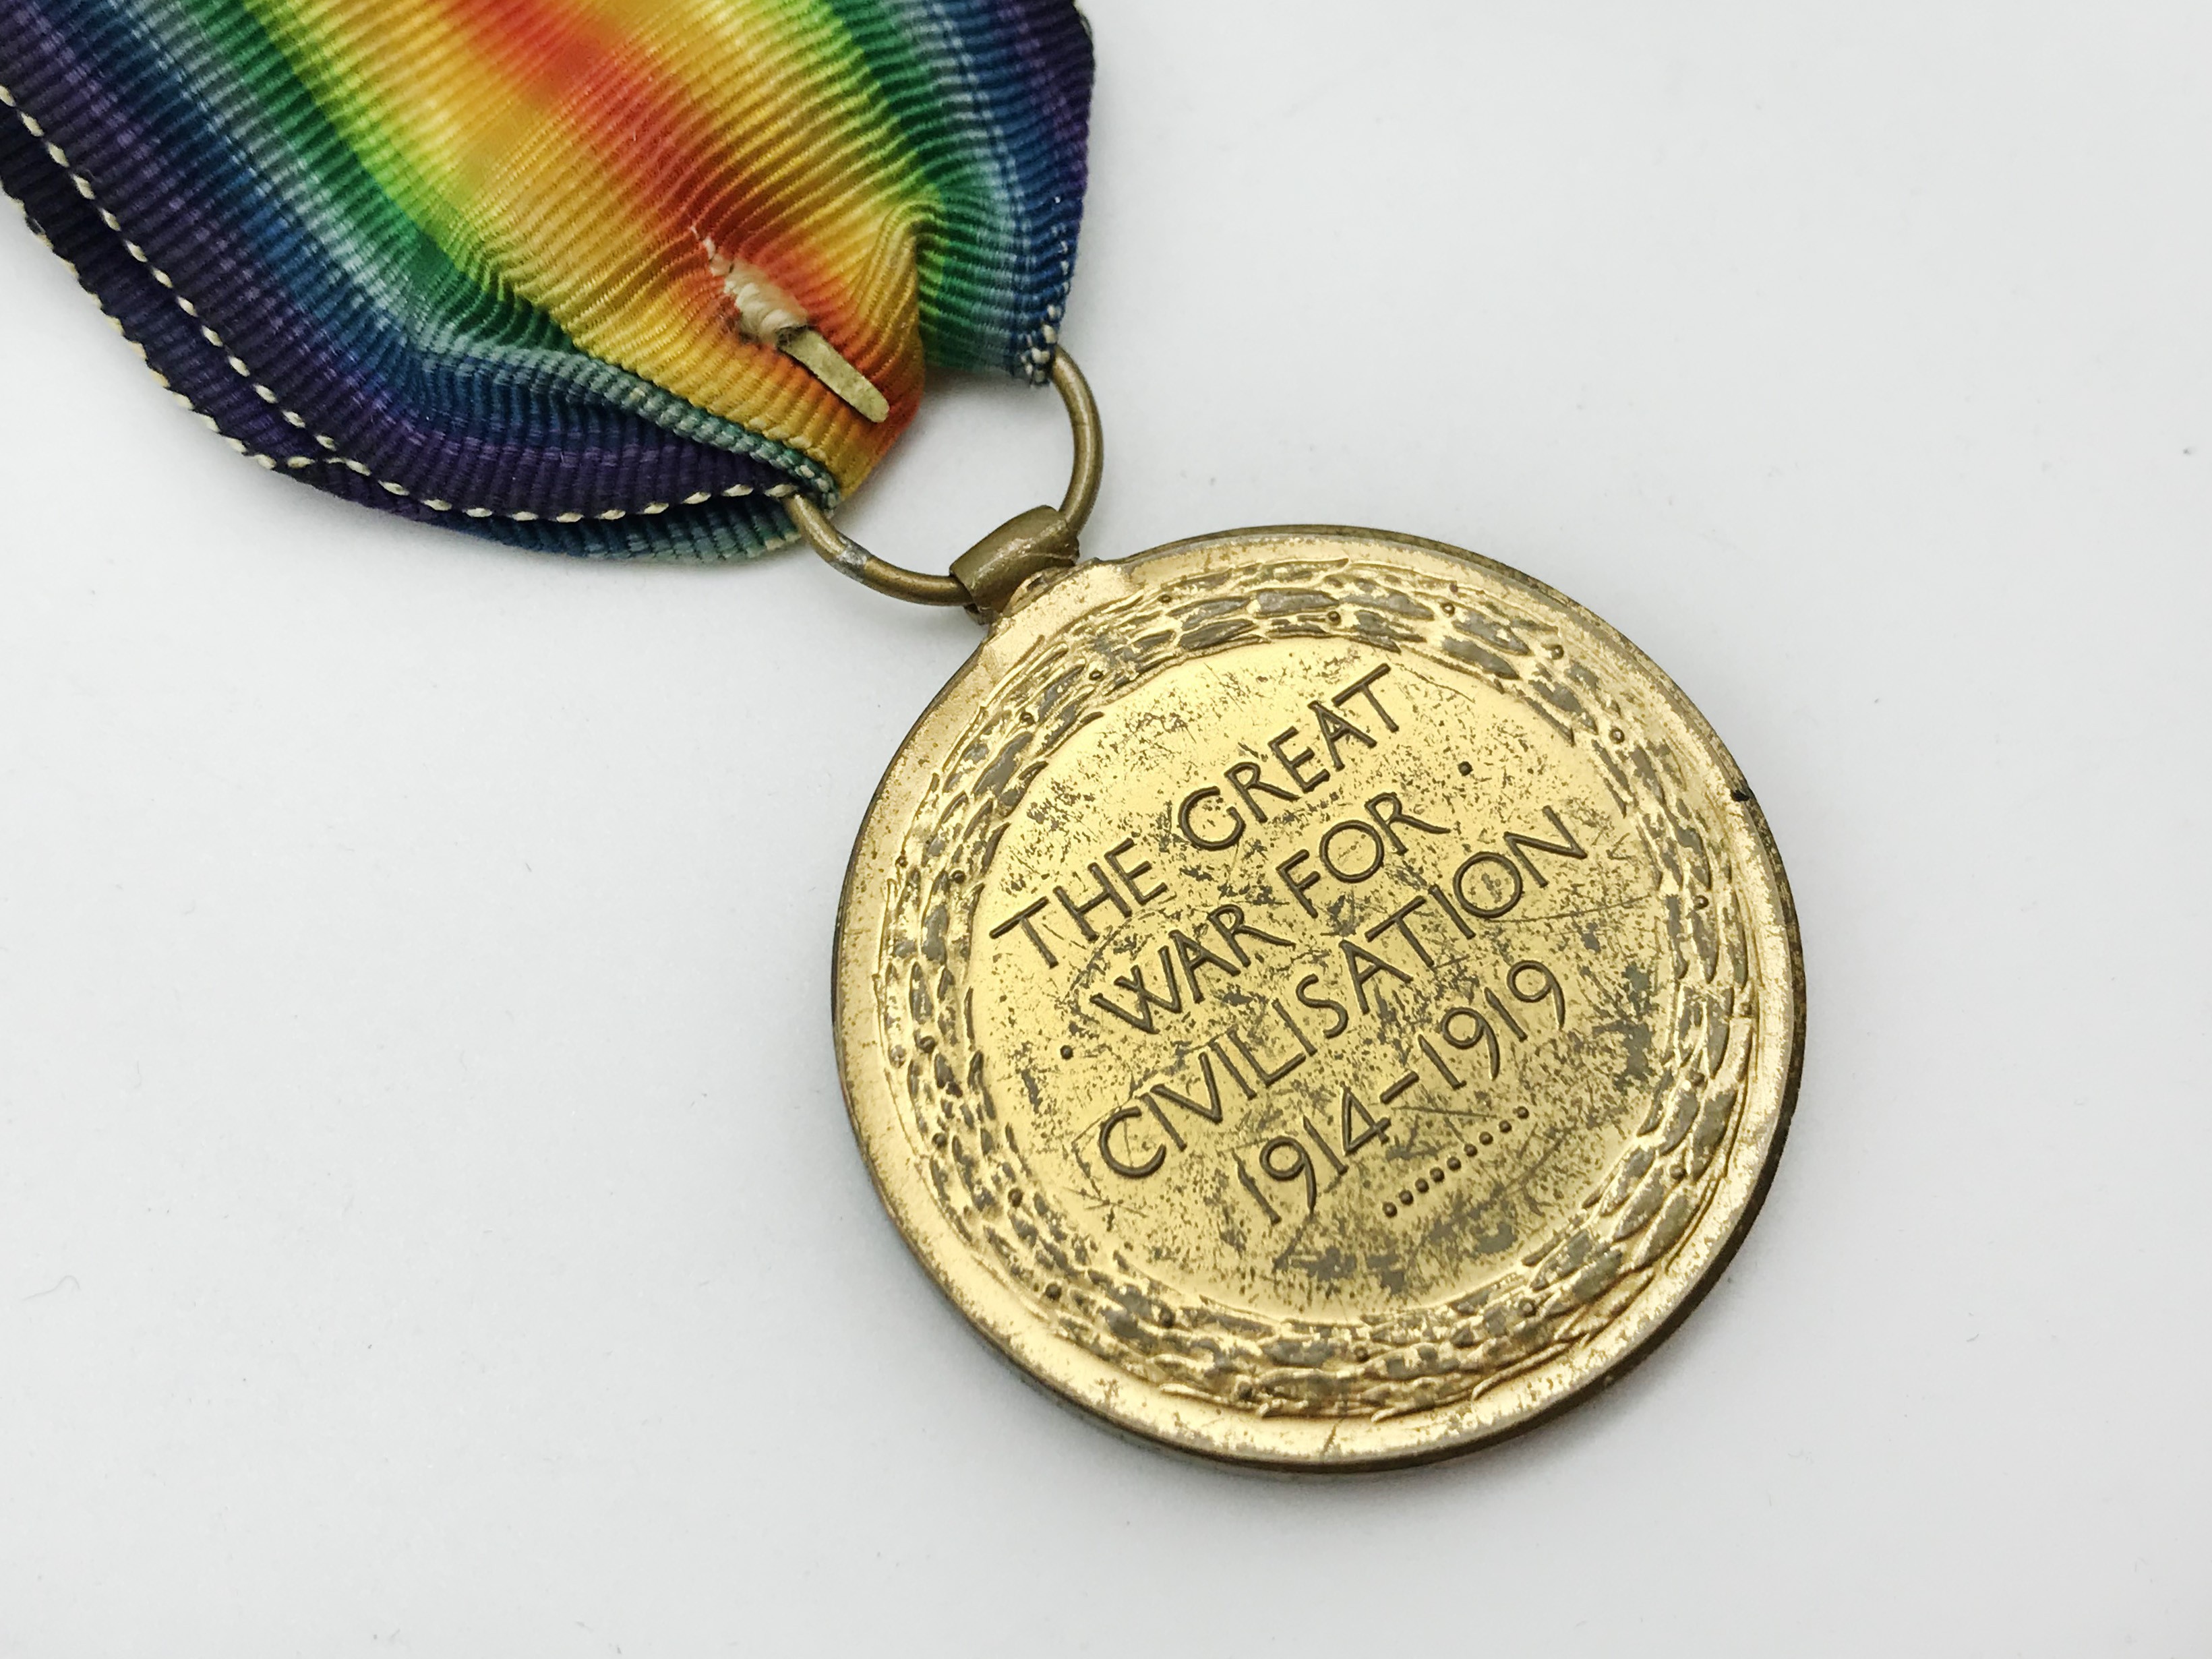 SELECTION OF VARIOUS MILITARY MEDALS INCLUDING A DEATH PENNY - Image 13 of 23